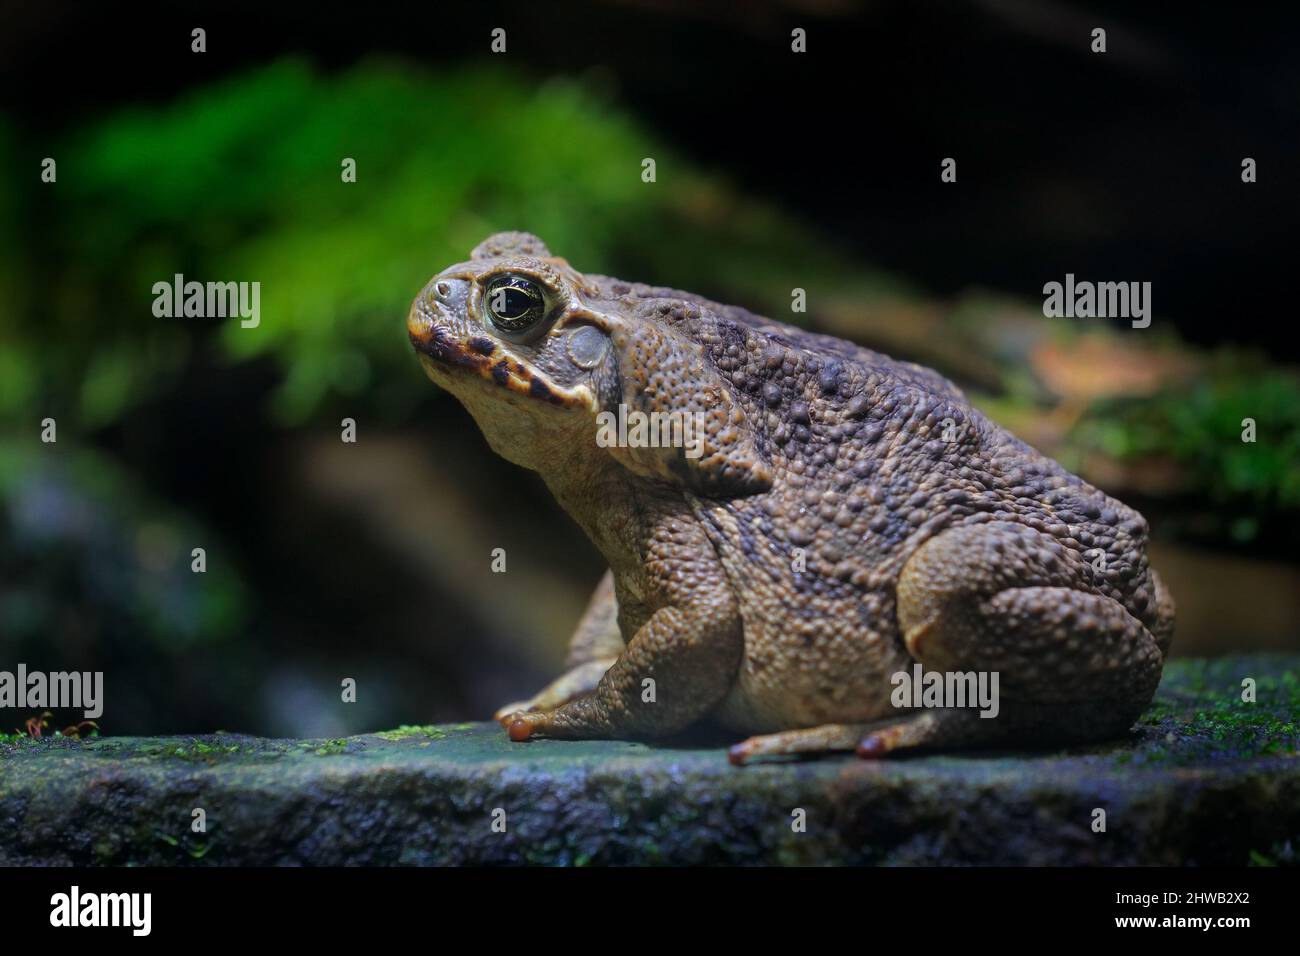 Rhinella marina, Cane toad, big frog from Costa Rica. Face portrait of large amphibian in the nature habitat. Animal in the tropic forest. Wildlife sc Stock Photo